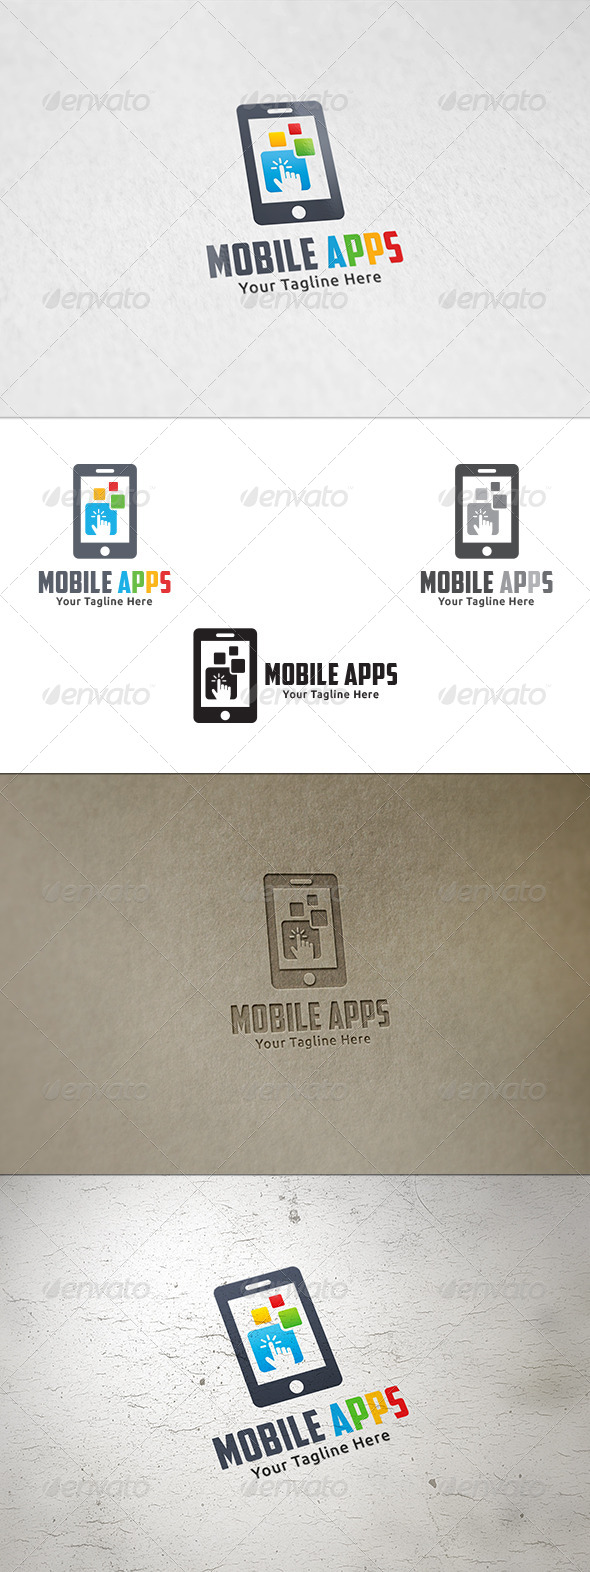 Mobile Apps - Logo Template